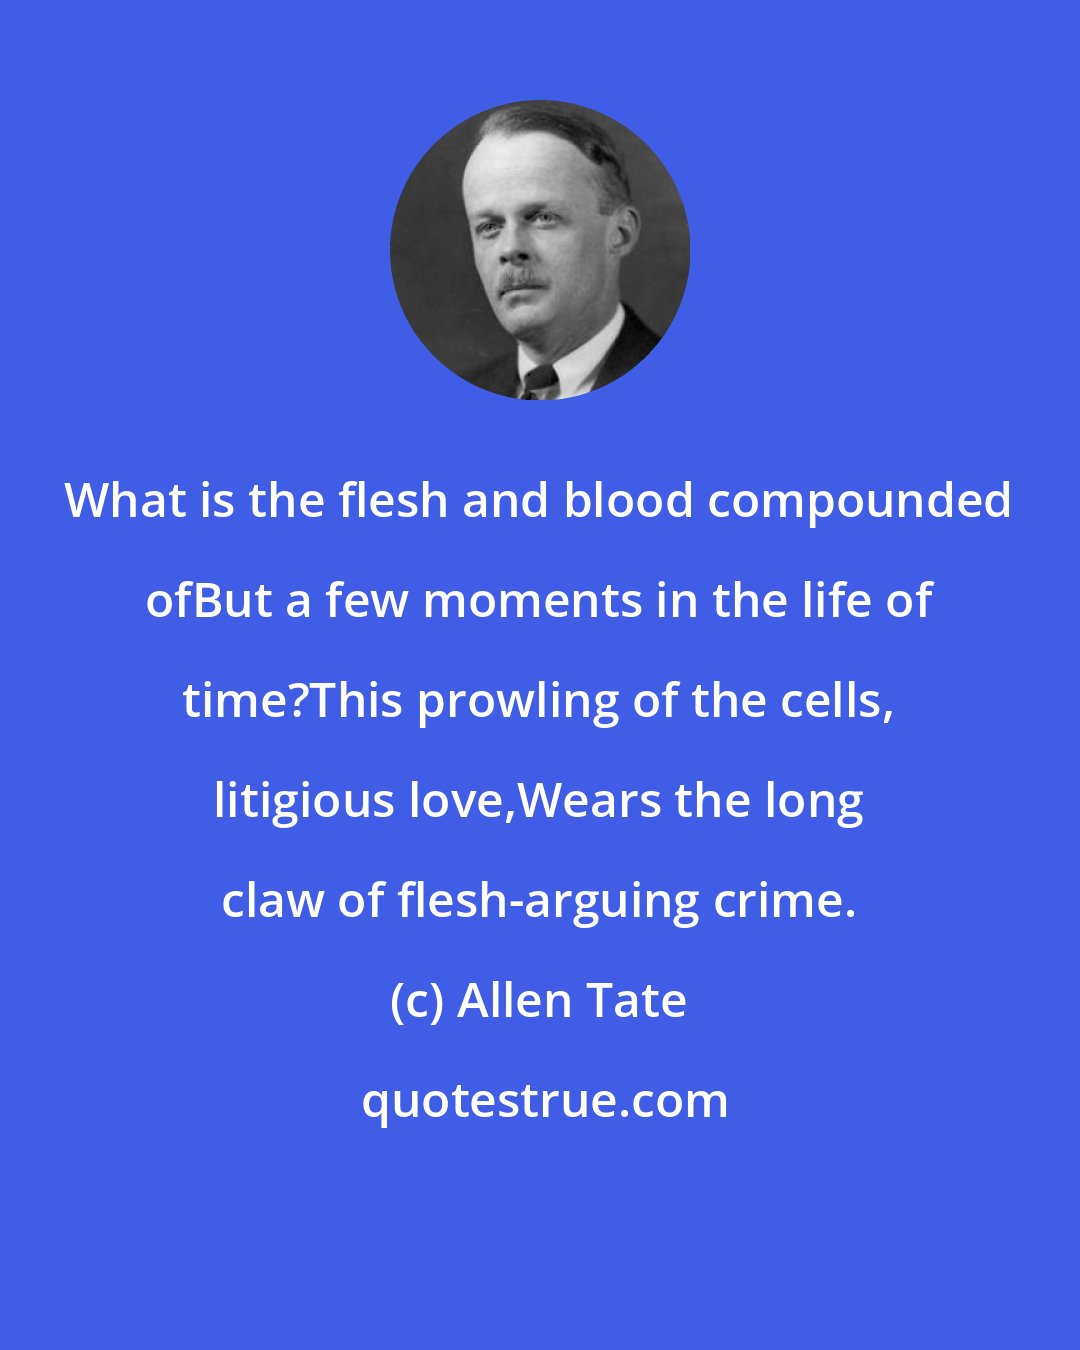 Allen Tate: What is the flesh and blood compounded ofBut a few moments in the life of time?This prowling of the cells, litigious love,Wears the long claw of flesh-arguing crime.